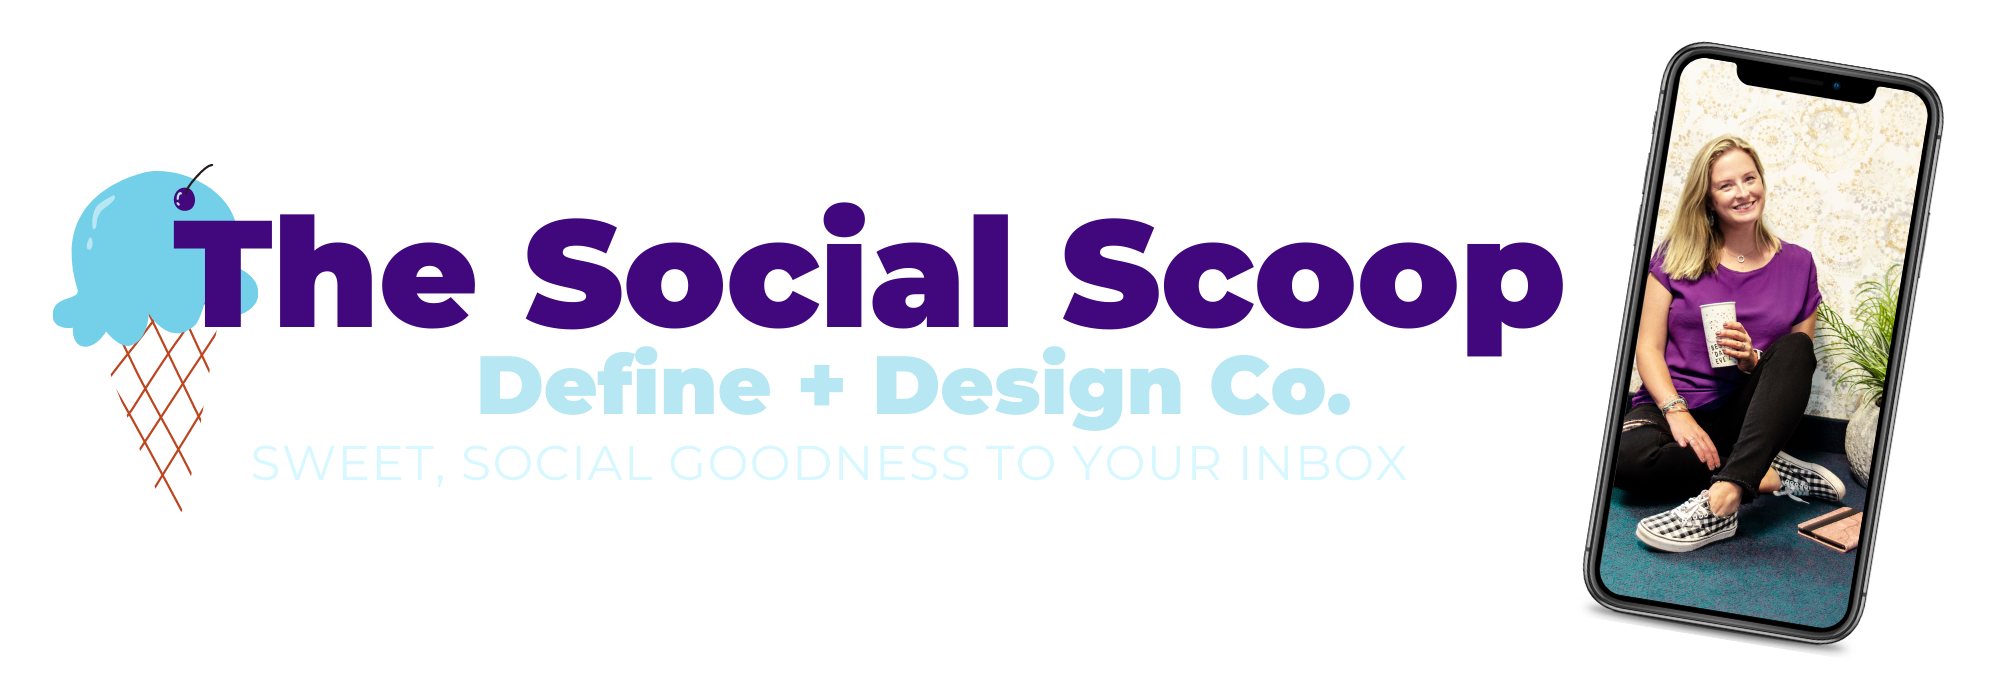 Latest social media strategies from The Social Scoop 